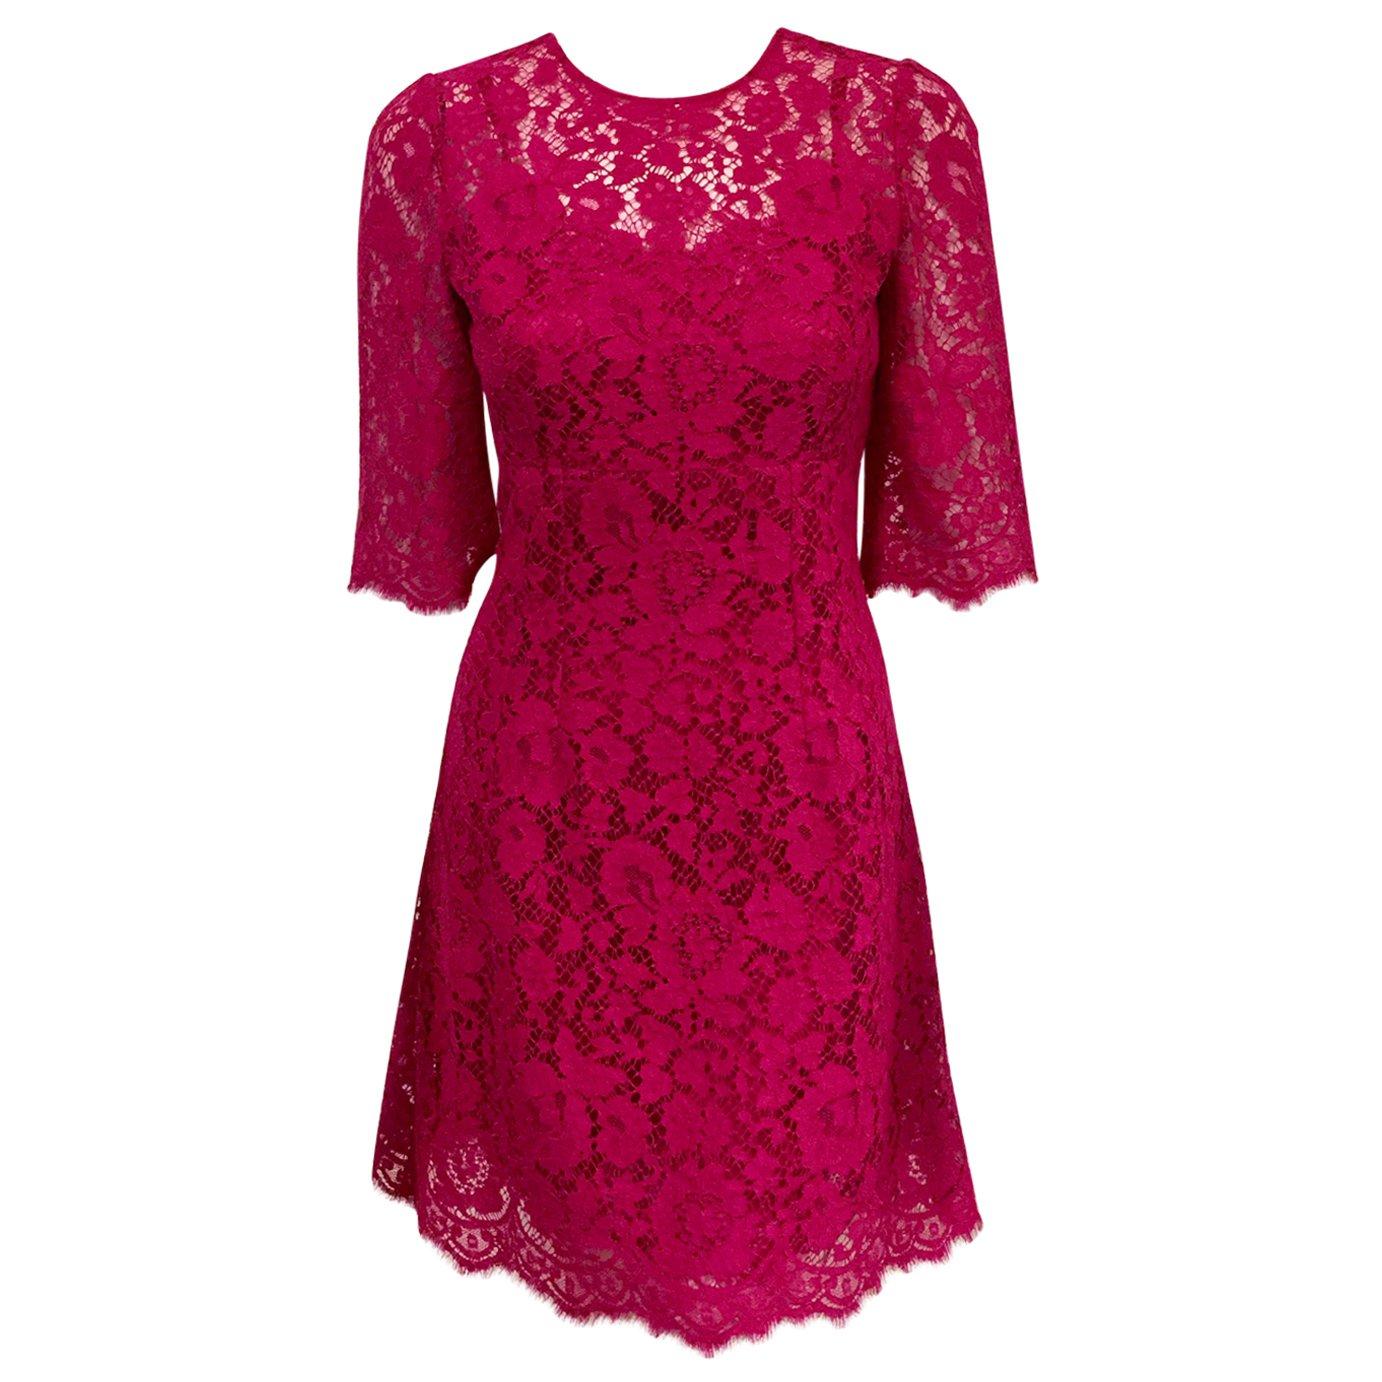  Dolce & Gabbana Rose Pink Lace Dress With Full Satin & Lace Slip 38 EU For Sale